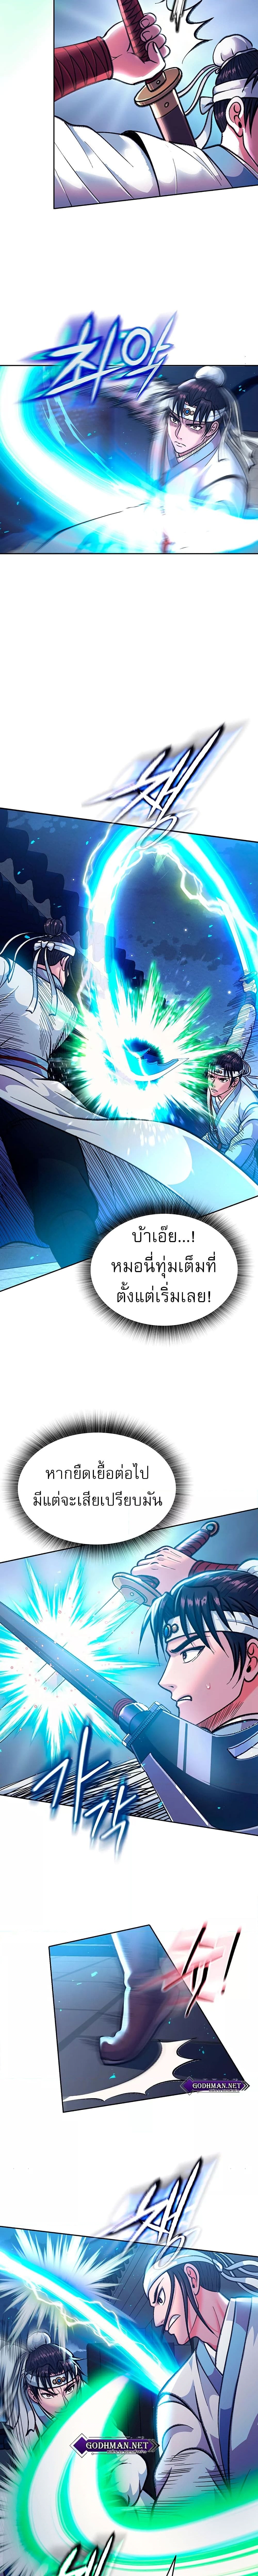 I Ended Up in the World of Murim ตอนที่ 3 ภาพ 7